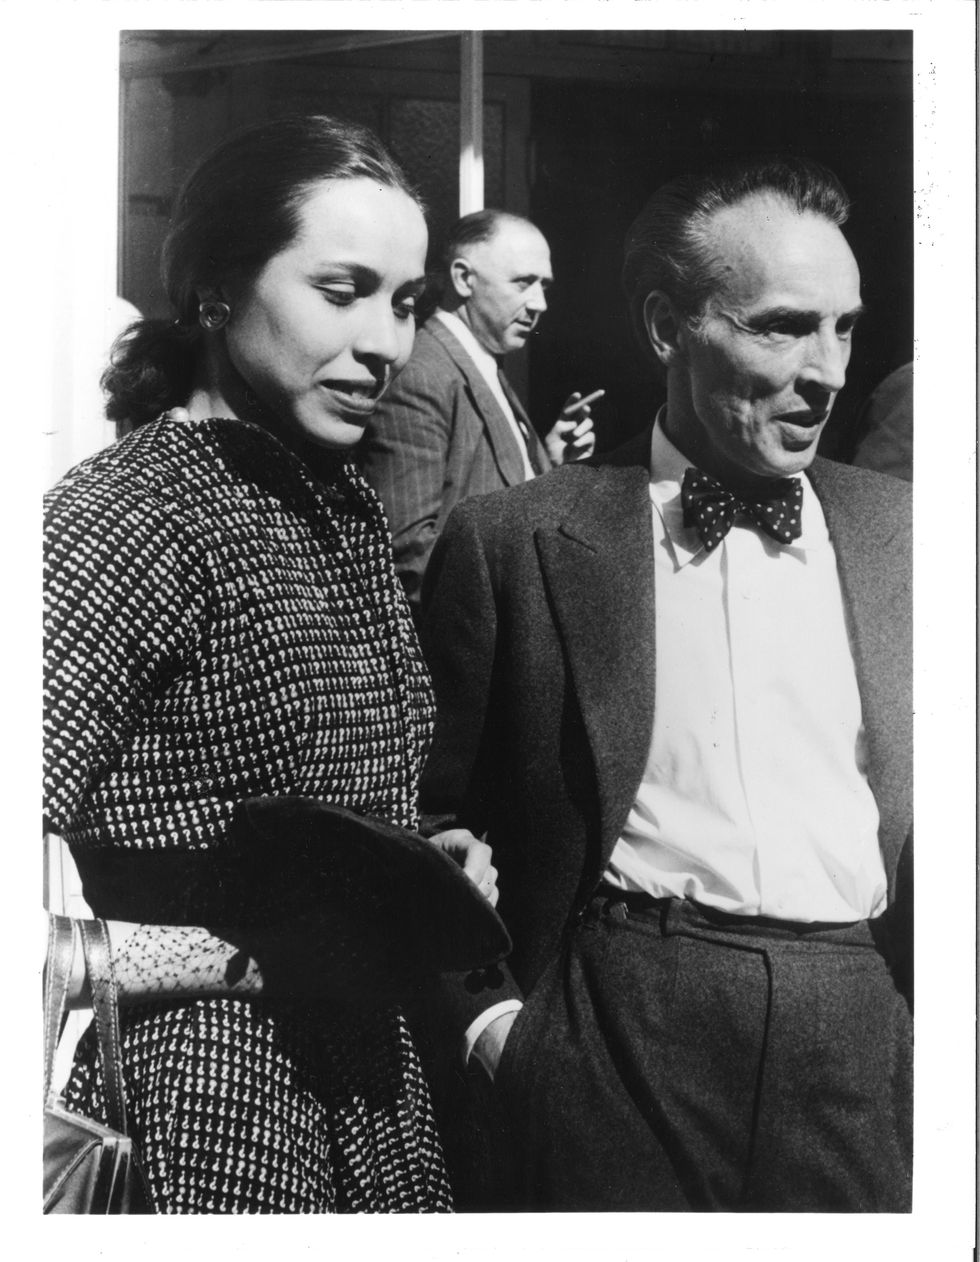 Maria Tallchief, wearing a nice patterned dress, and George Balanchine, in a suit with a bow tie, stand shoulder to shoulder, listening to someone speak off camera.